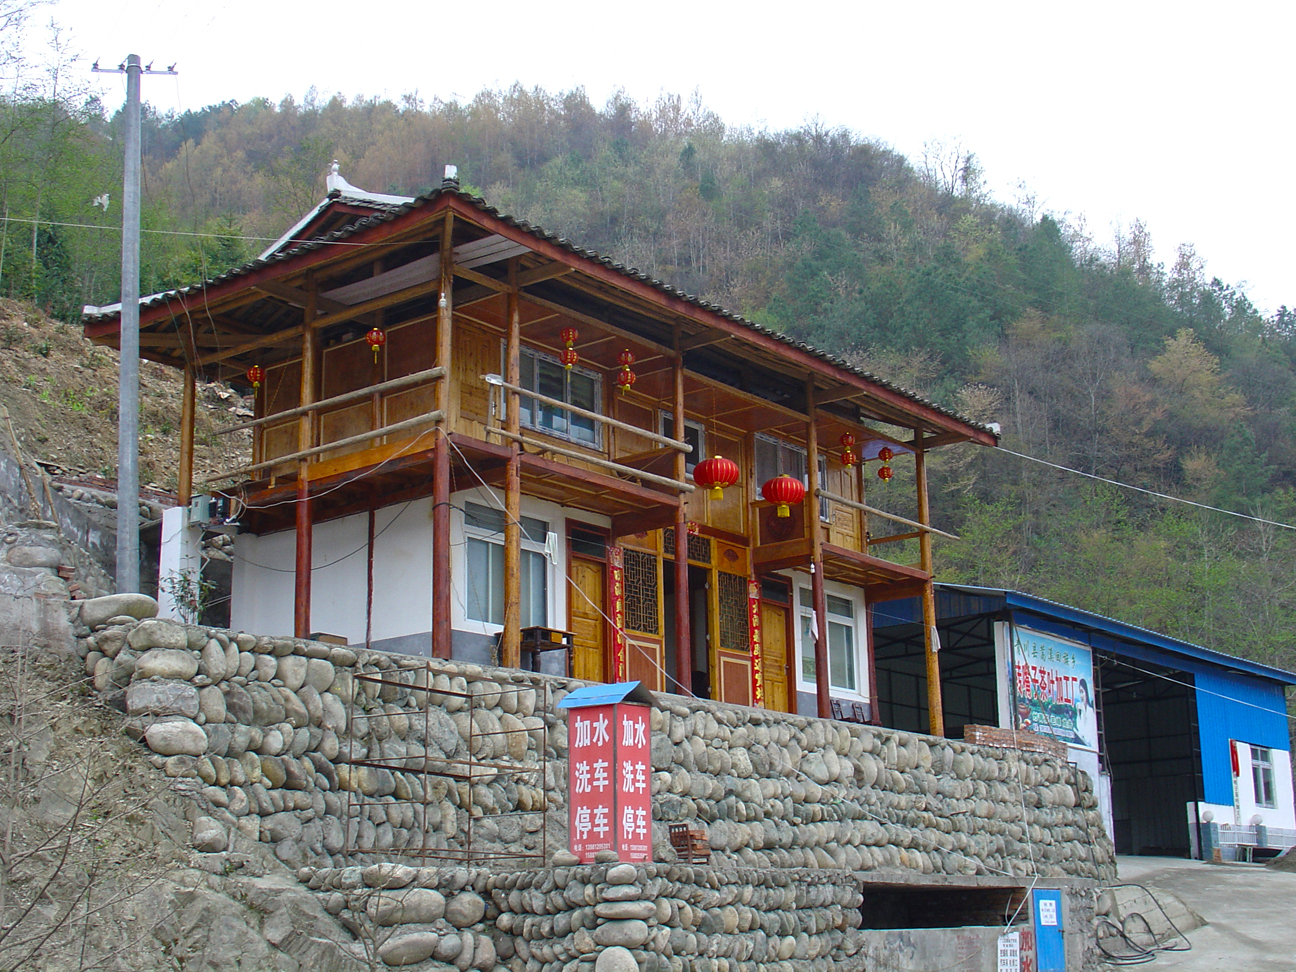 A house in traditional style.